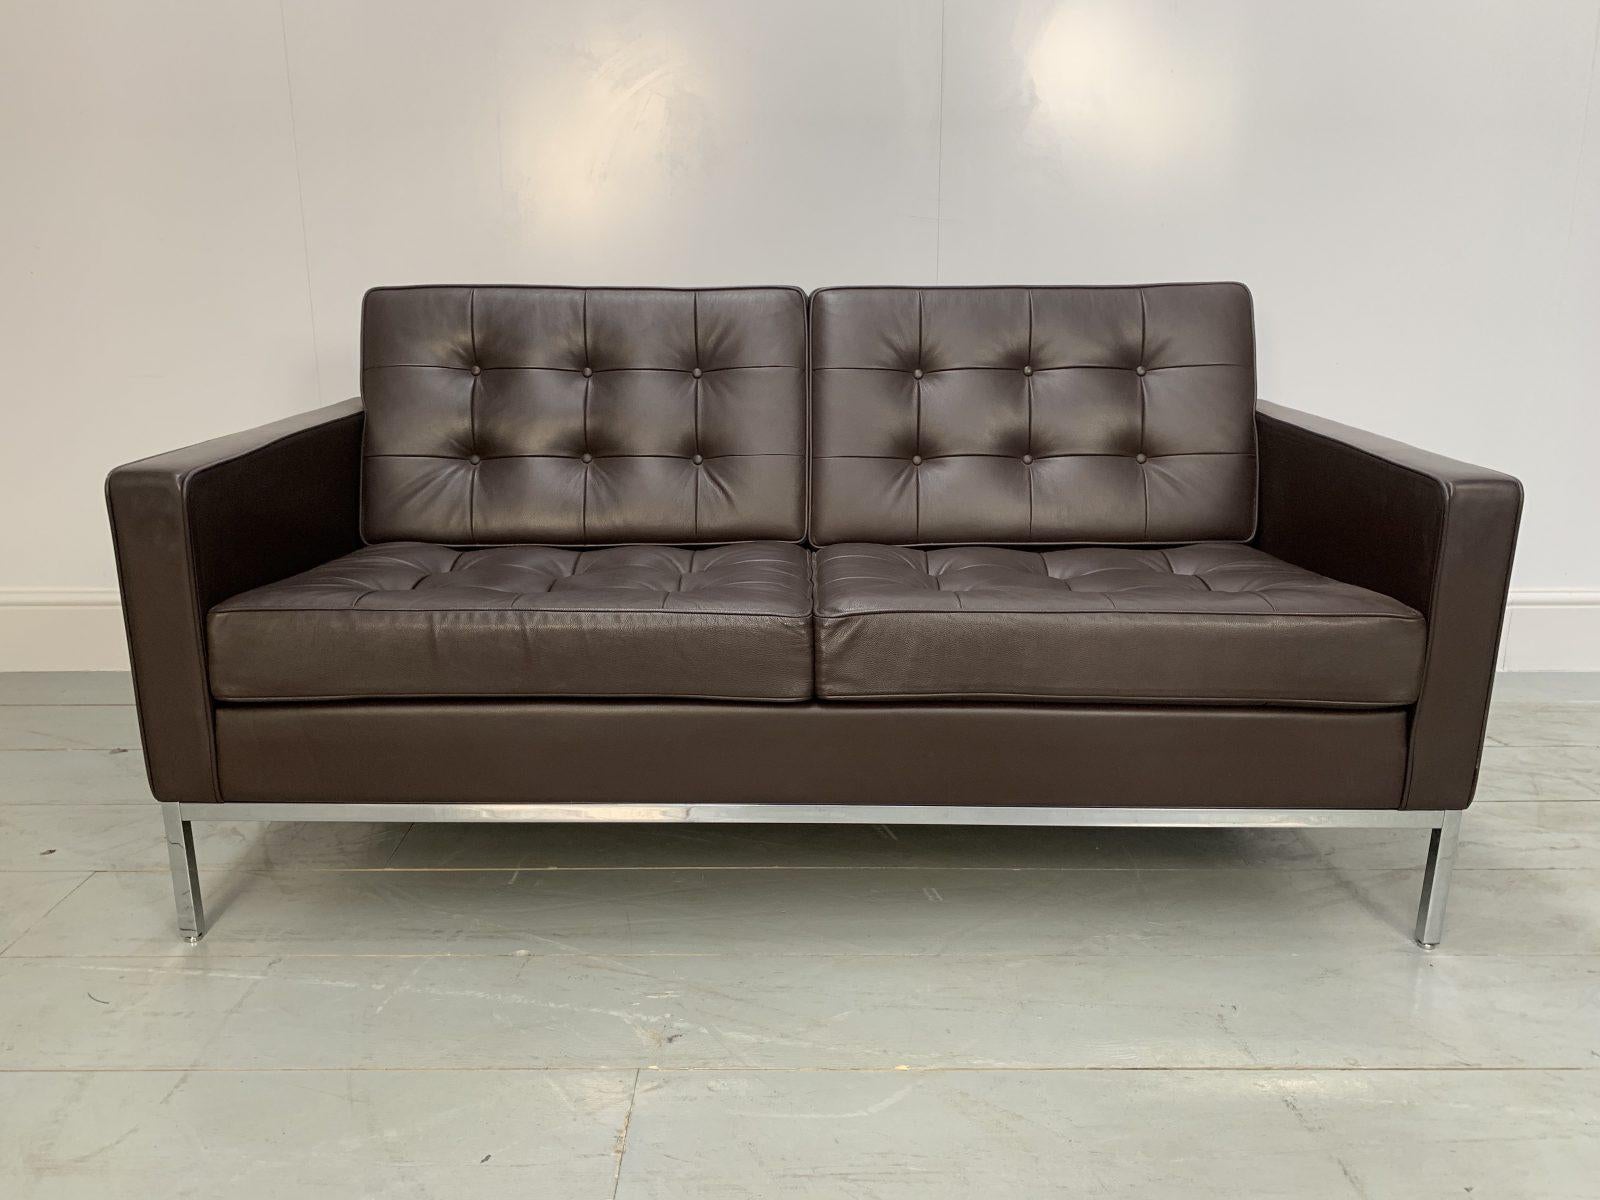 On offer on this occasion is a rare, original “Florence Knoll” settee sofa (remarkably, one of two identical pieces available at present) from the world renown furniture house of Knoll Studio, dressed in their sublime Knoll “Sabrina” leather in